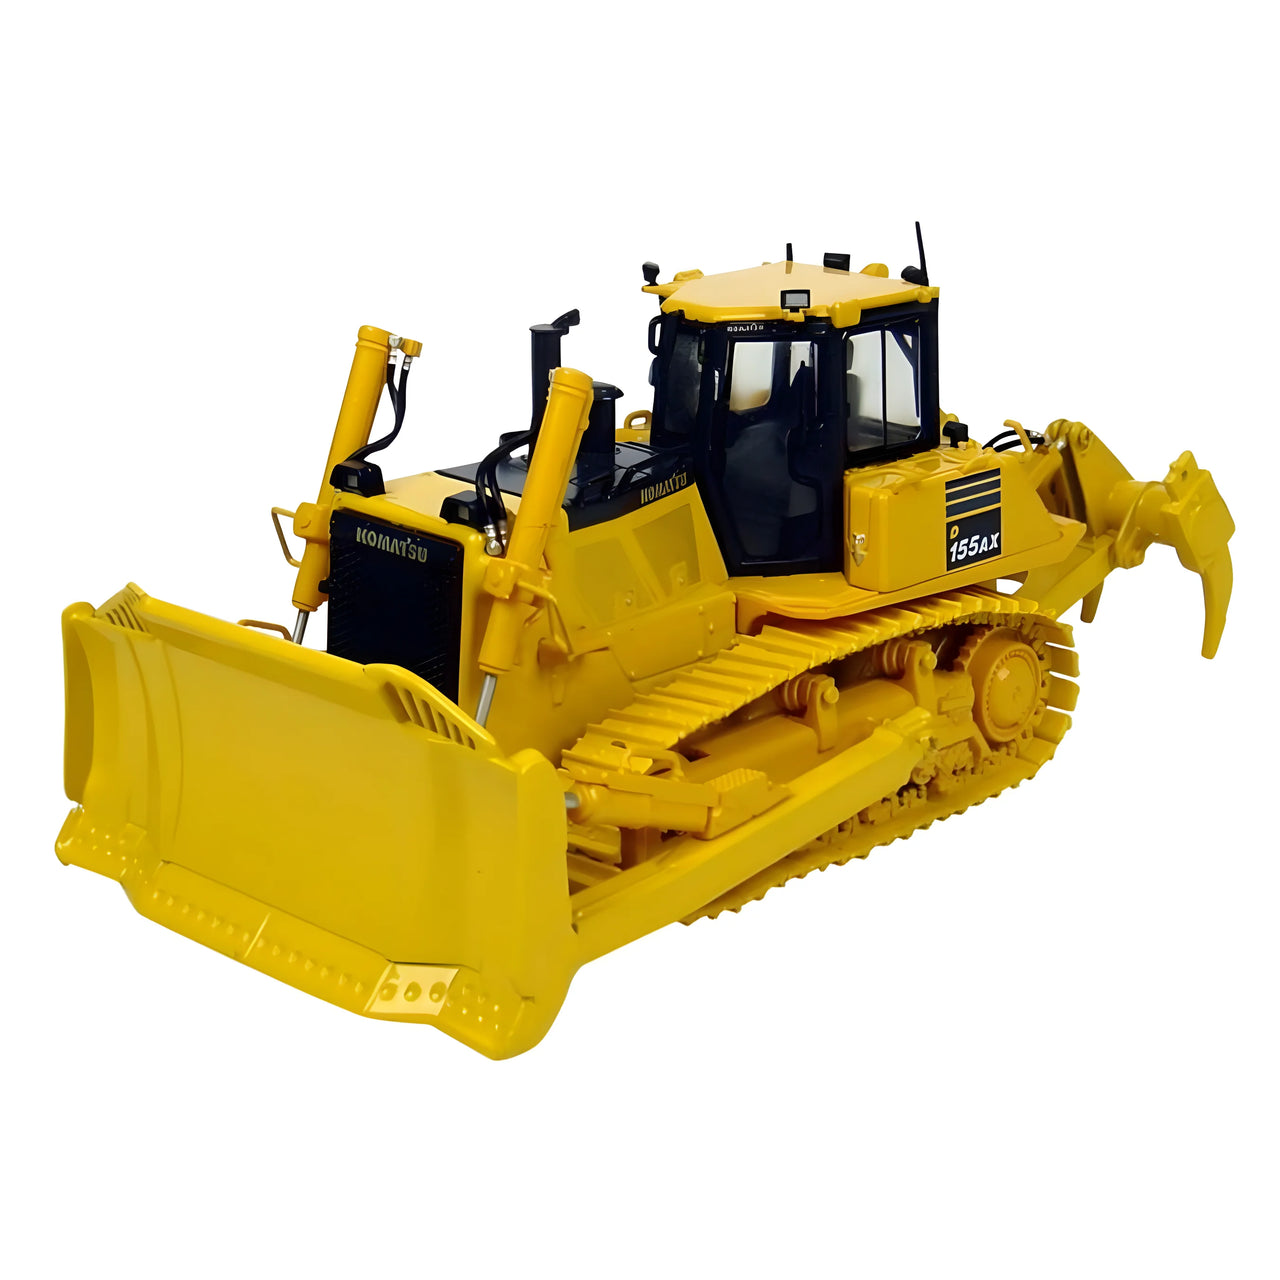 UH8010 Komatsu D155AX-7 Tracked Tractor 1:50 Scale